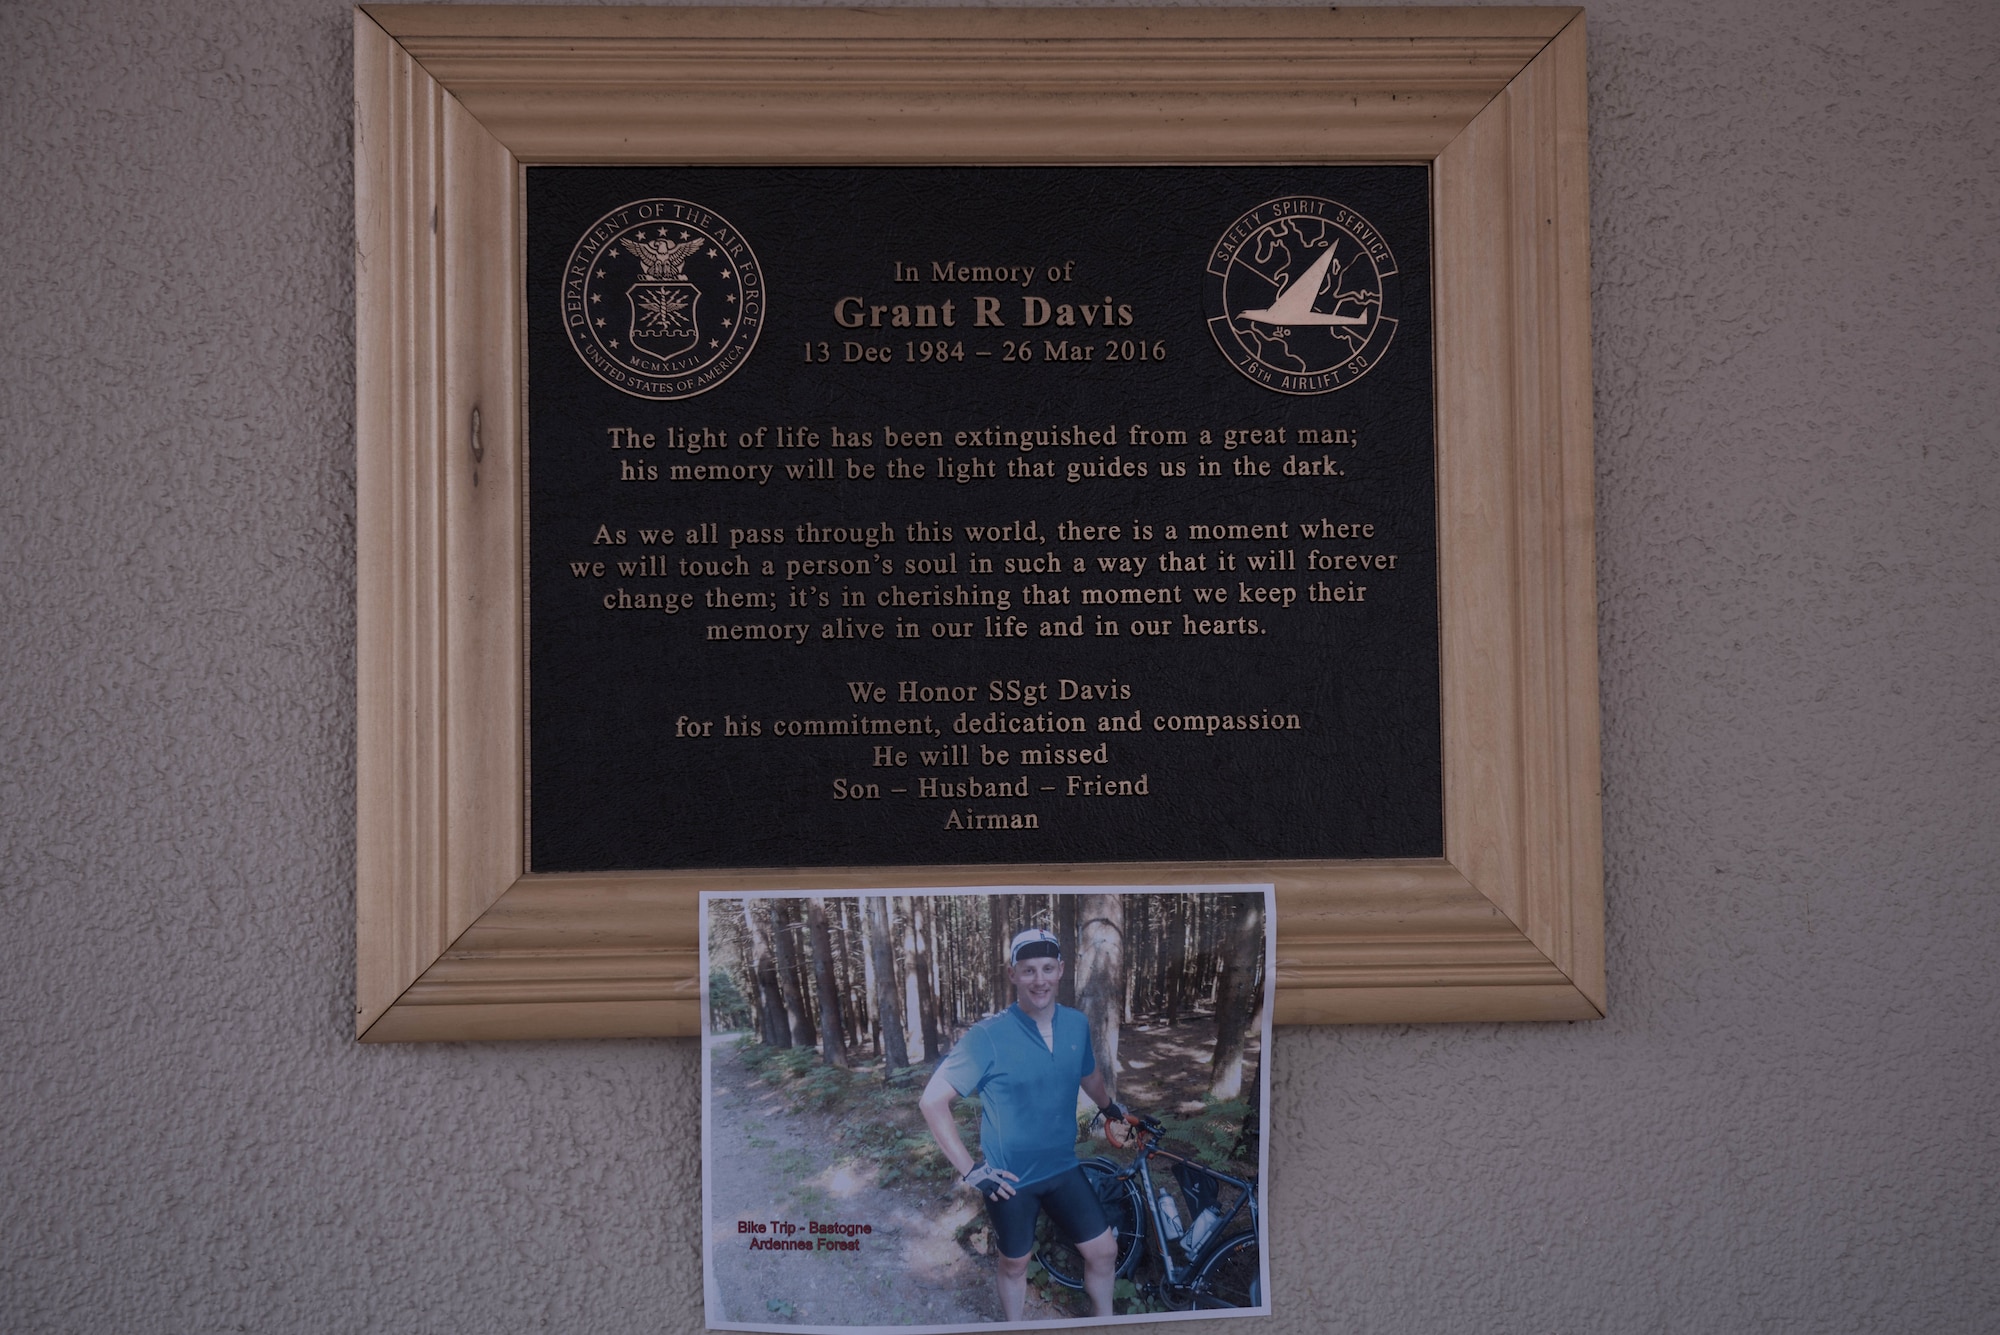 Picture of a man on a bike below a memorial plaque.